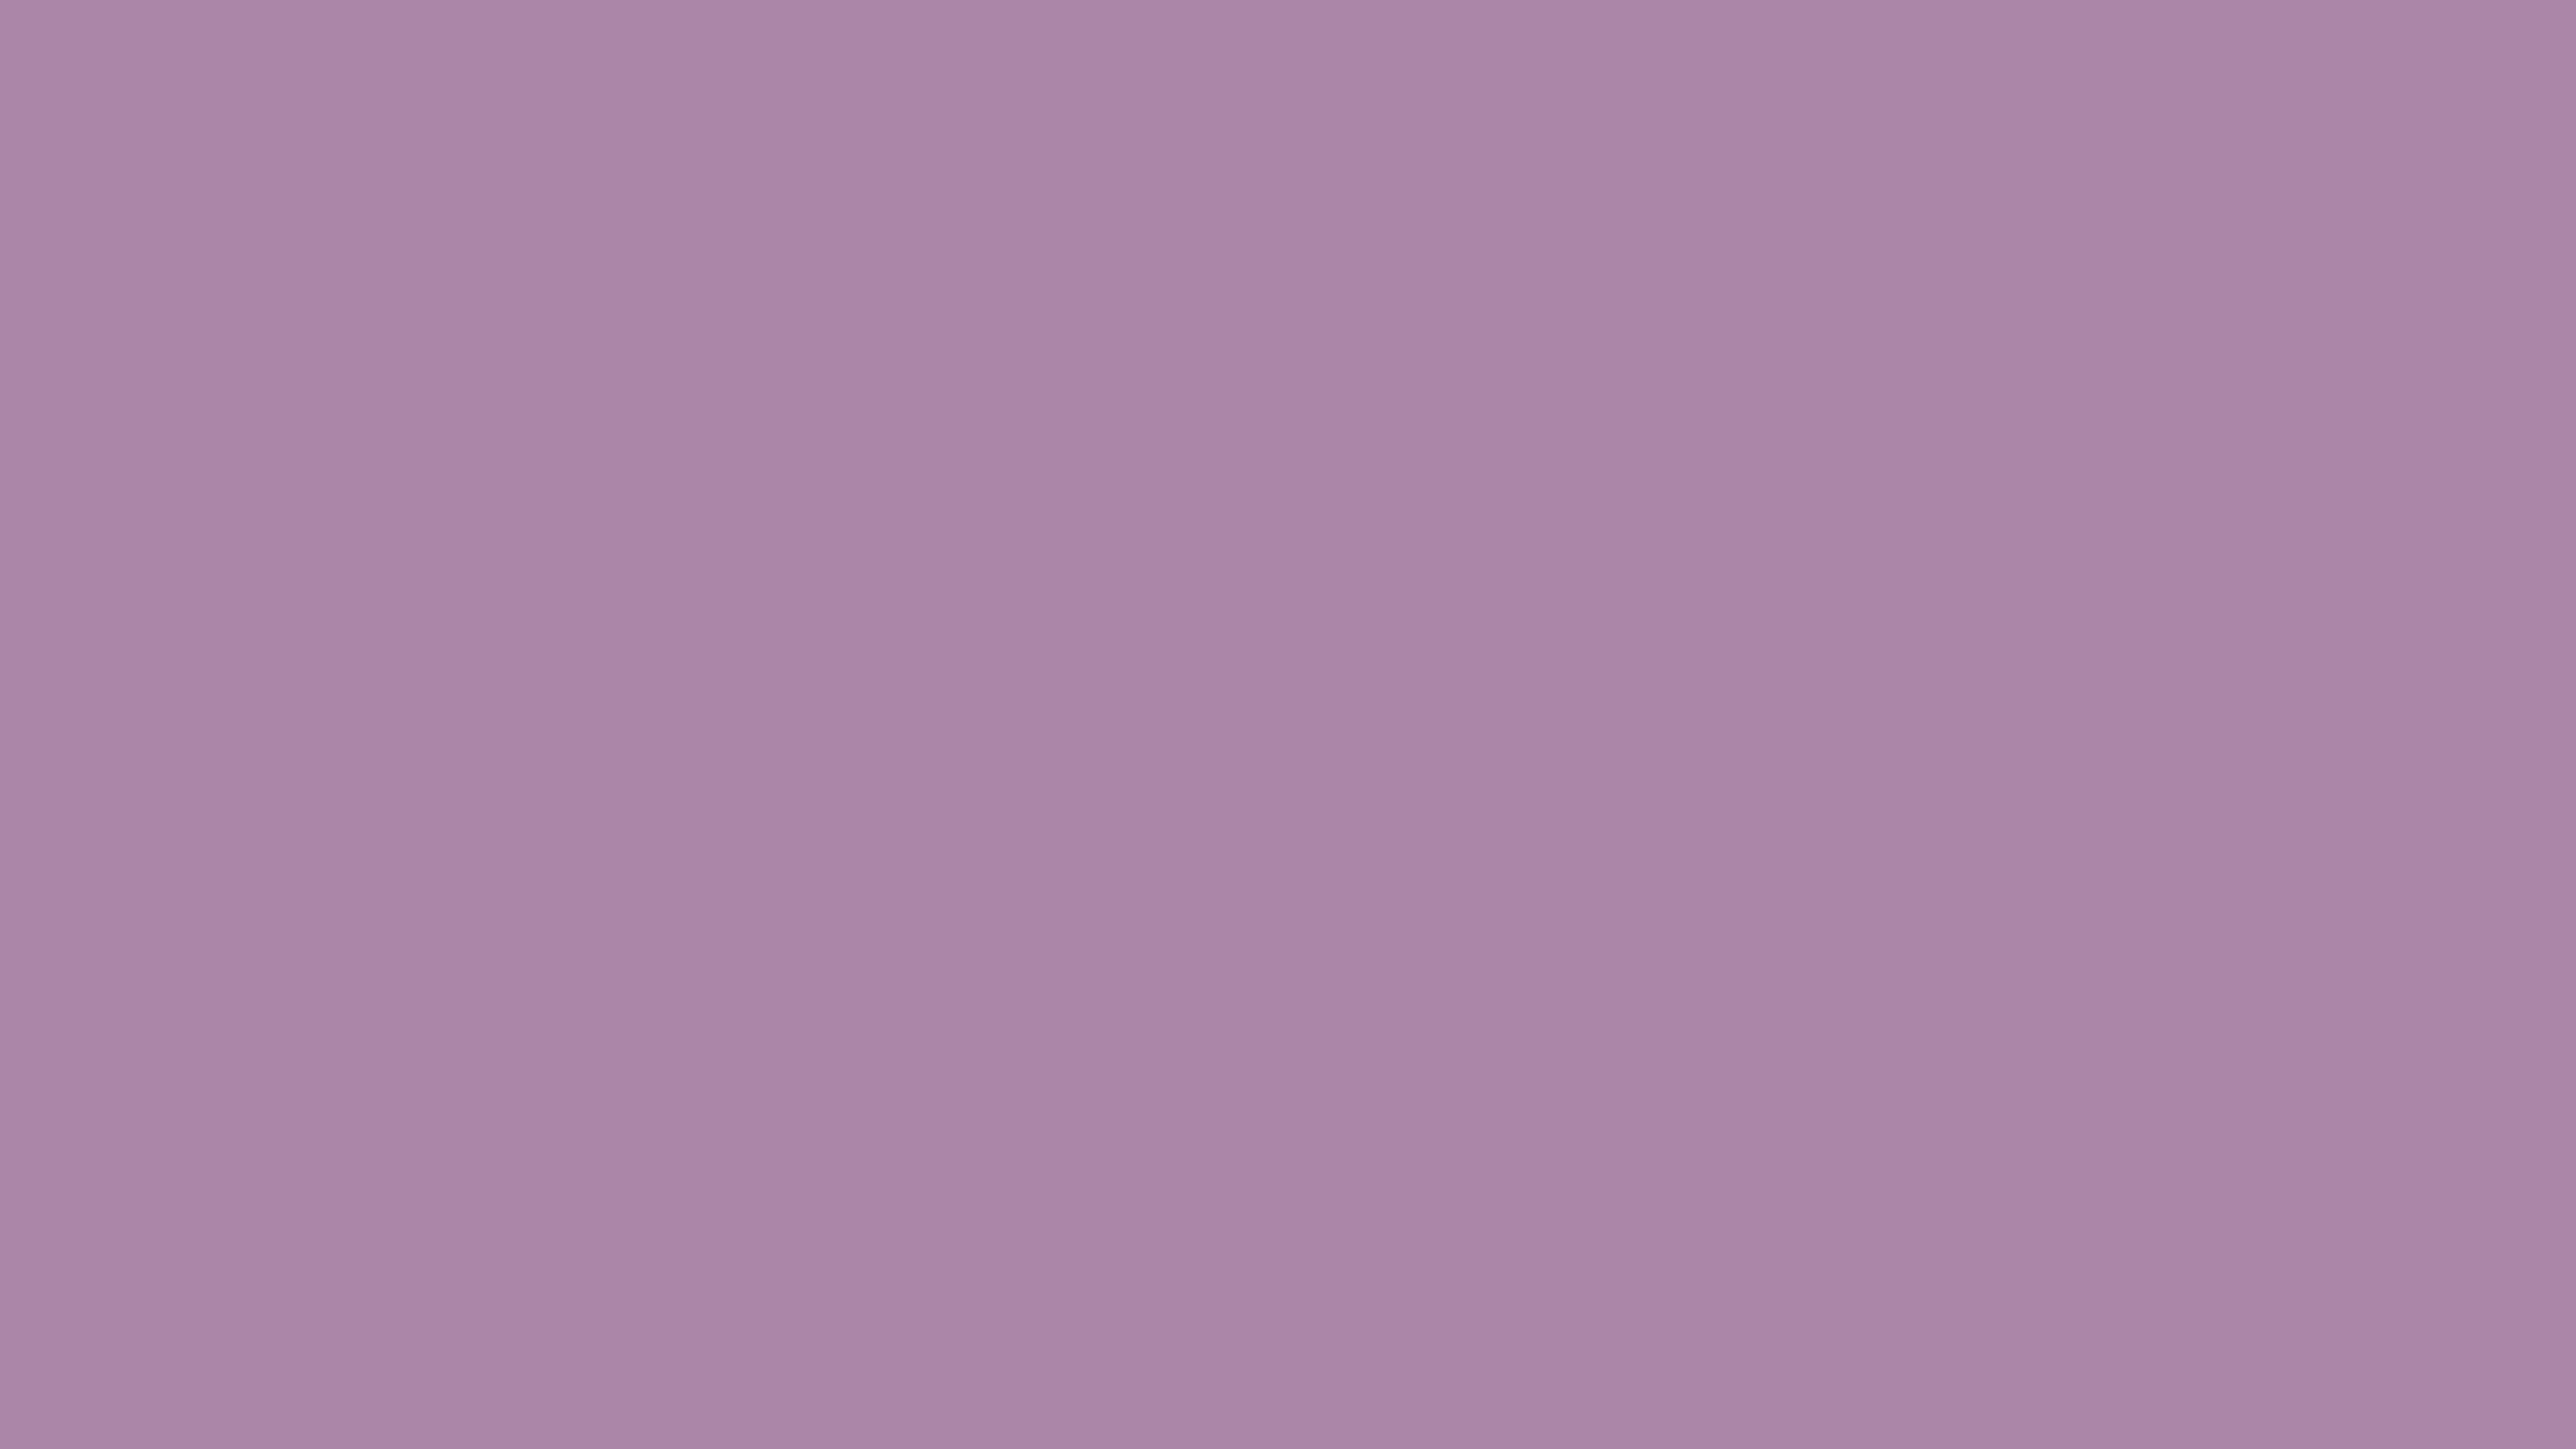 https://files.123freevectors.com/wp-content/solidbackground/dusty-lavender-free-solidcolor-background.jpg